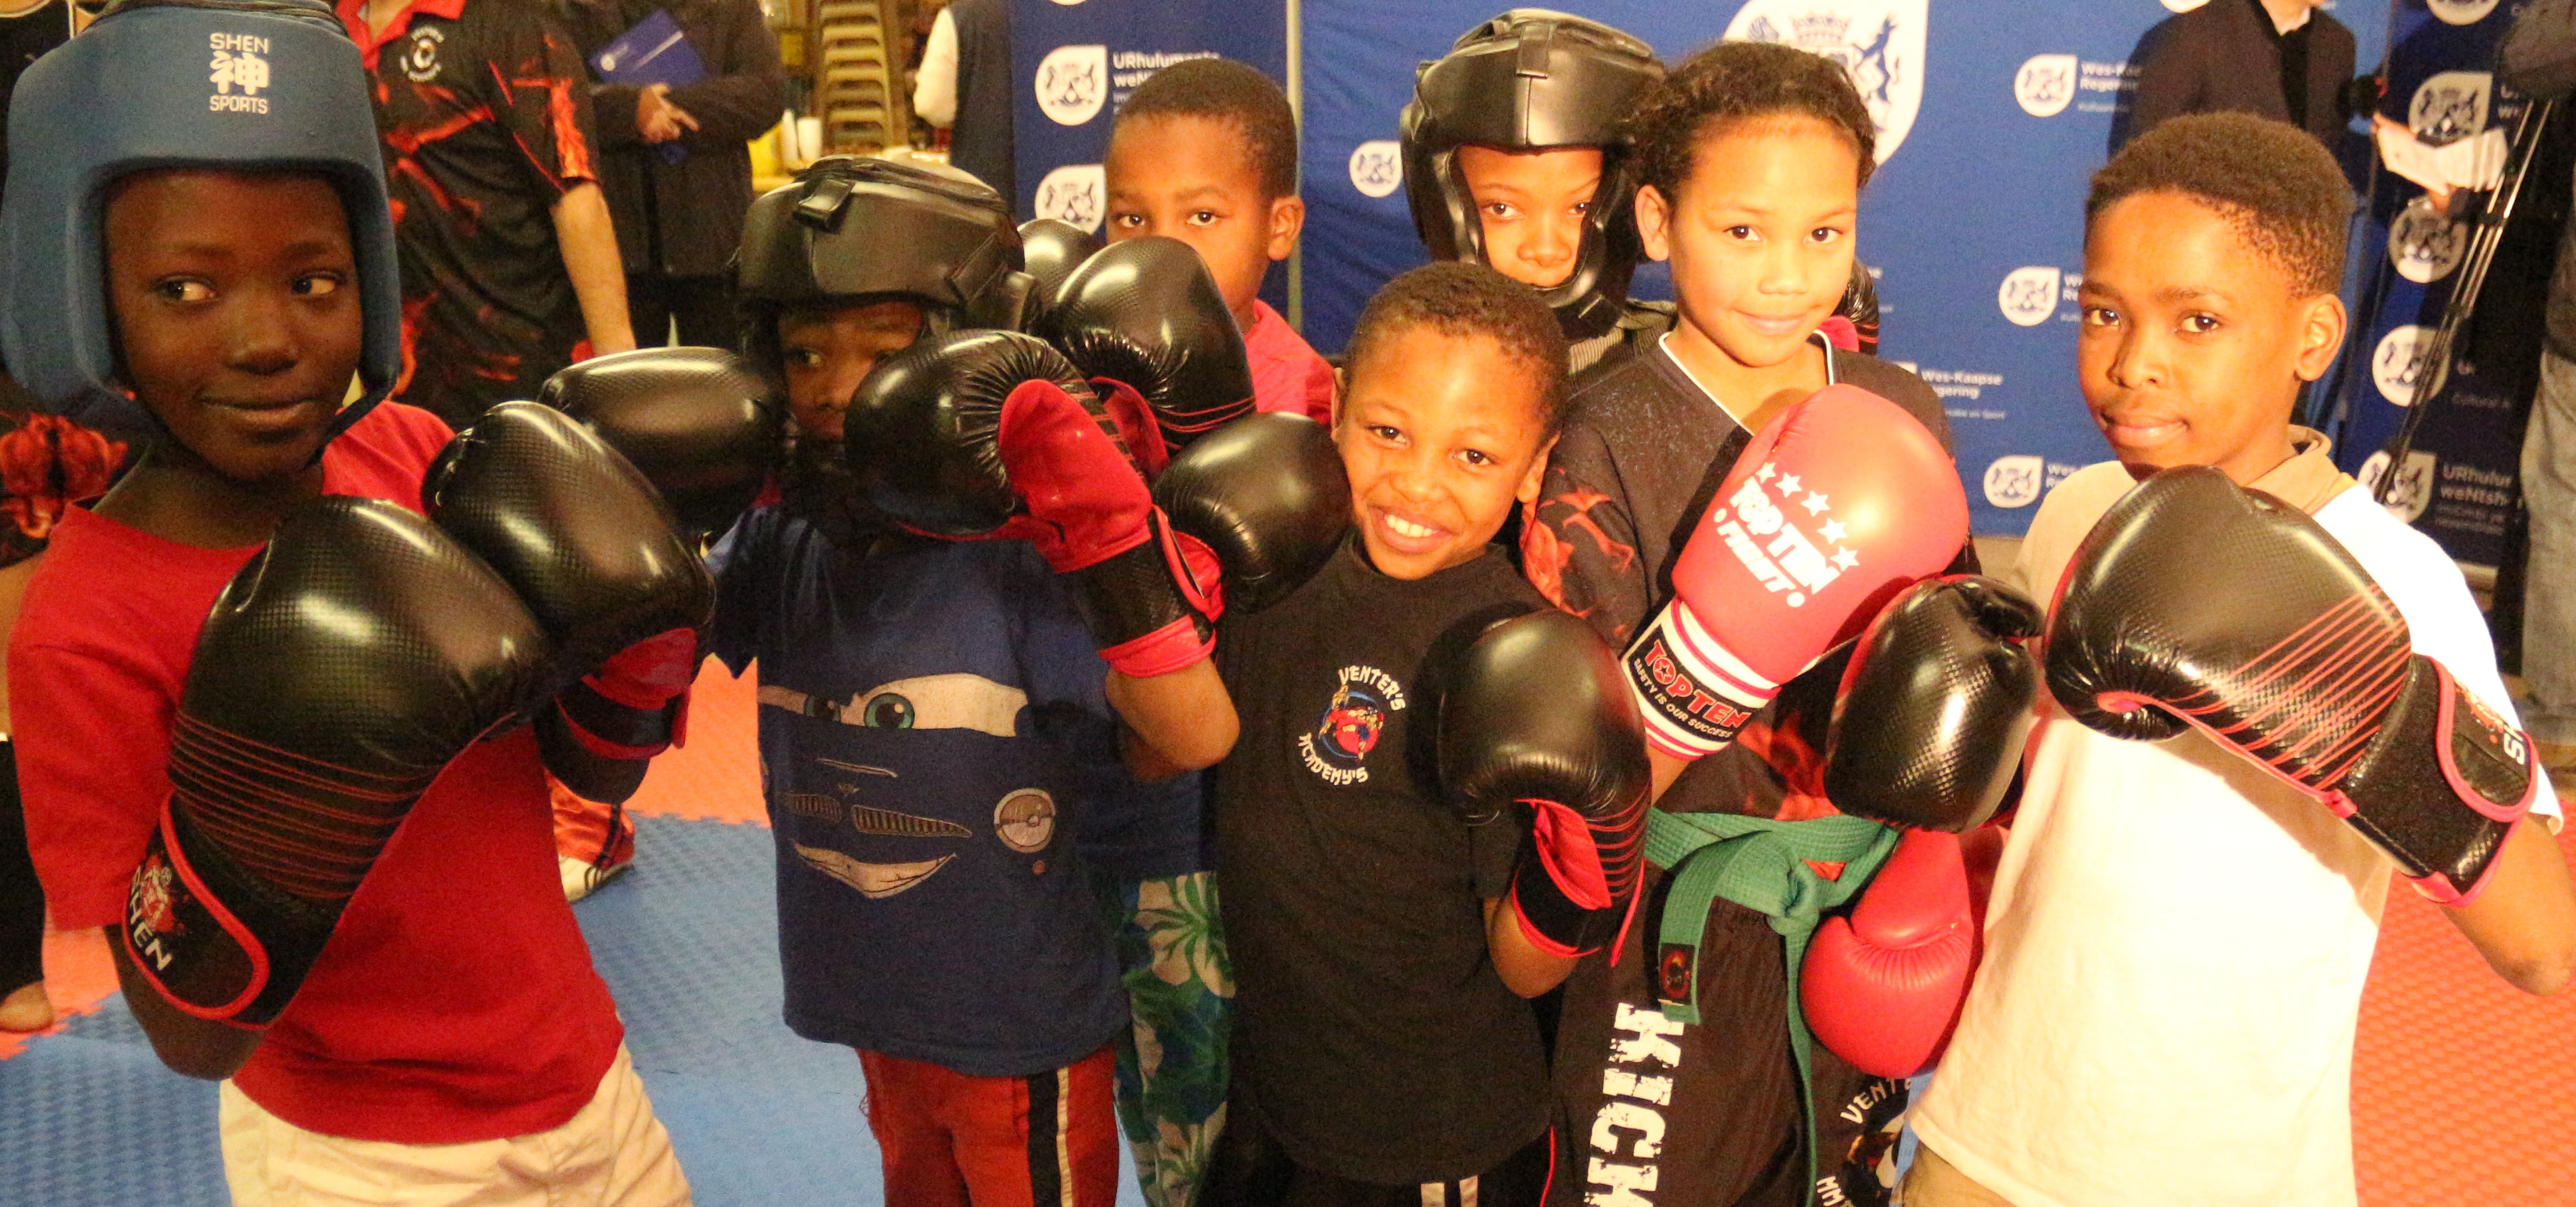 Excited kick-boxers who are expected to benefit from the club.